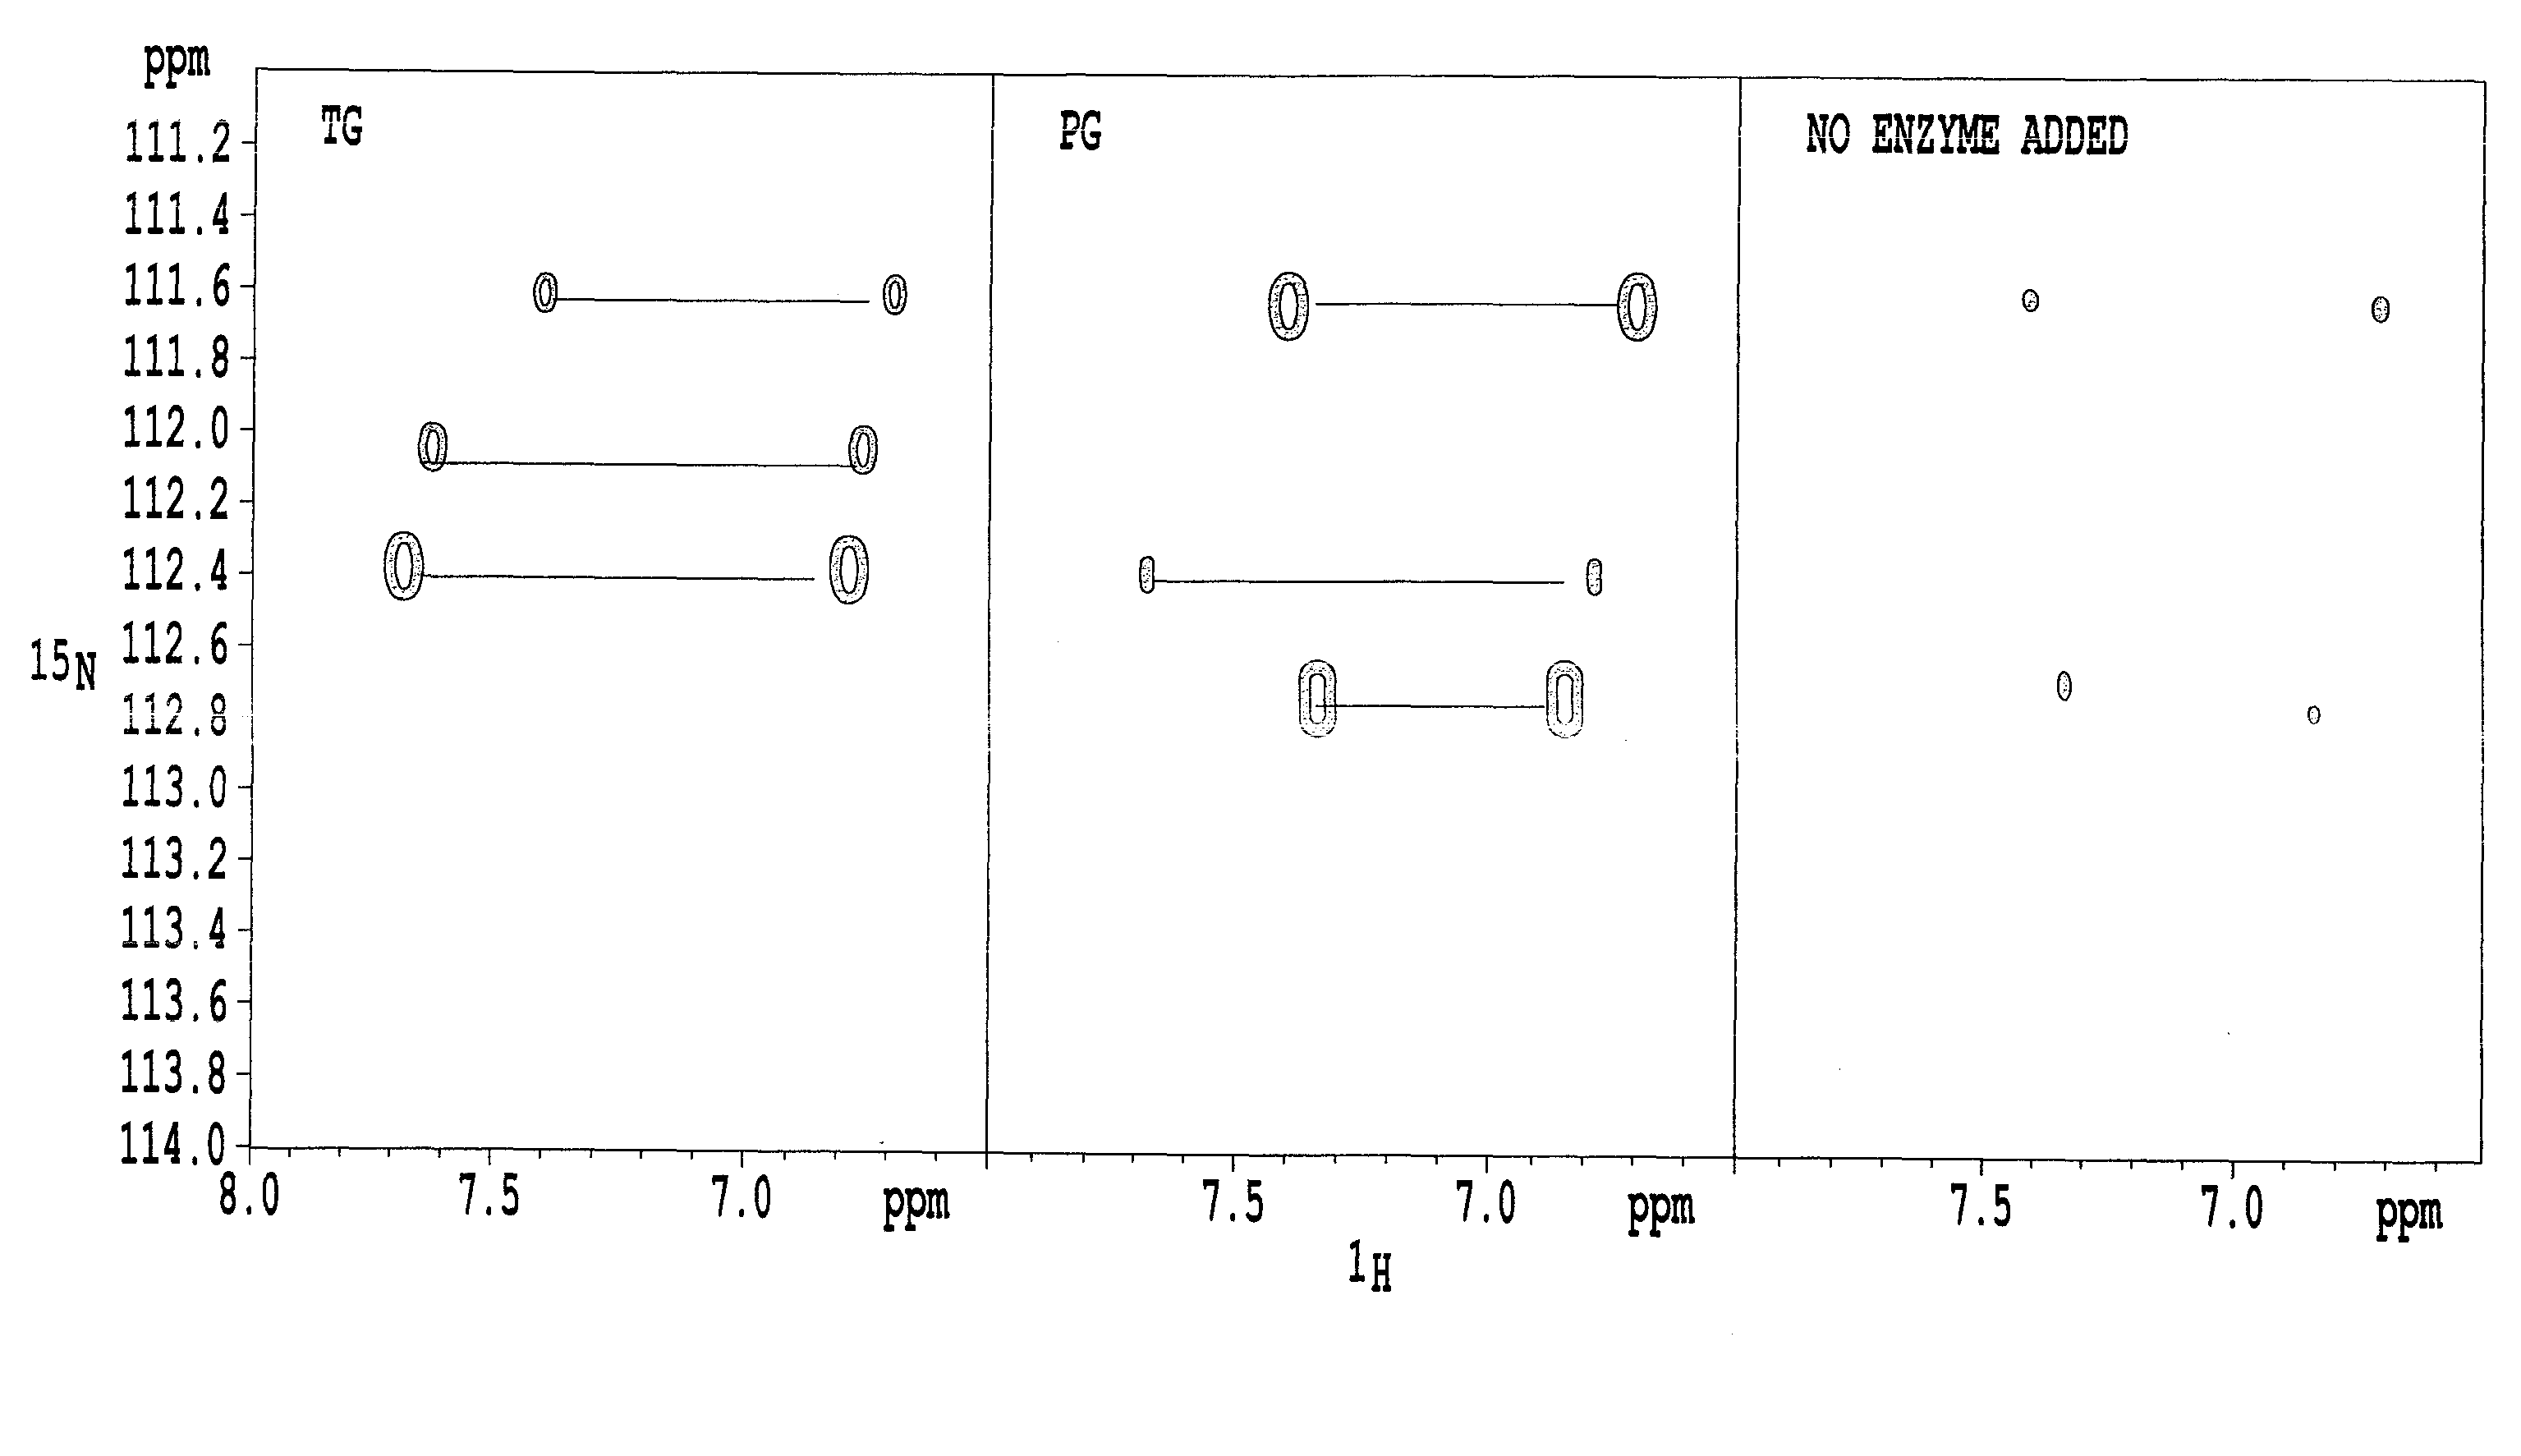 Method of denaturing protein with enzymes